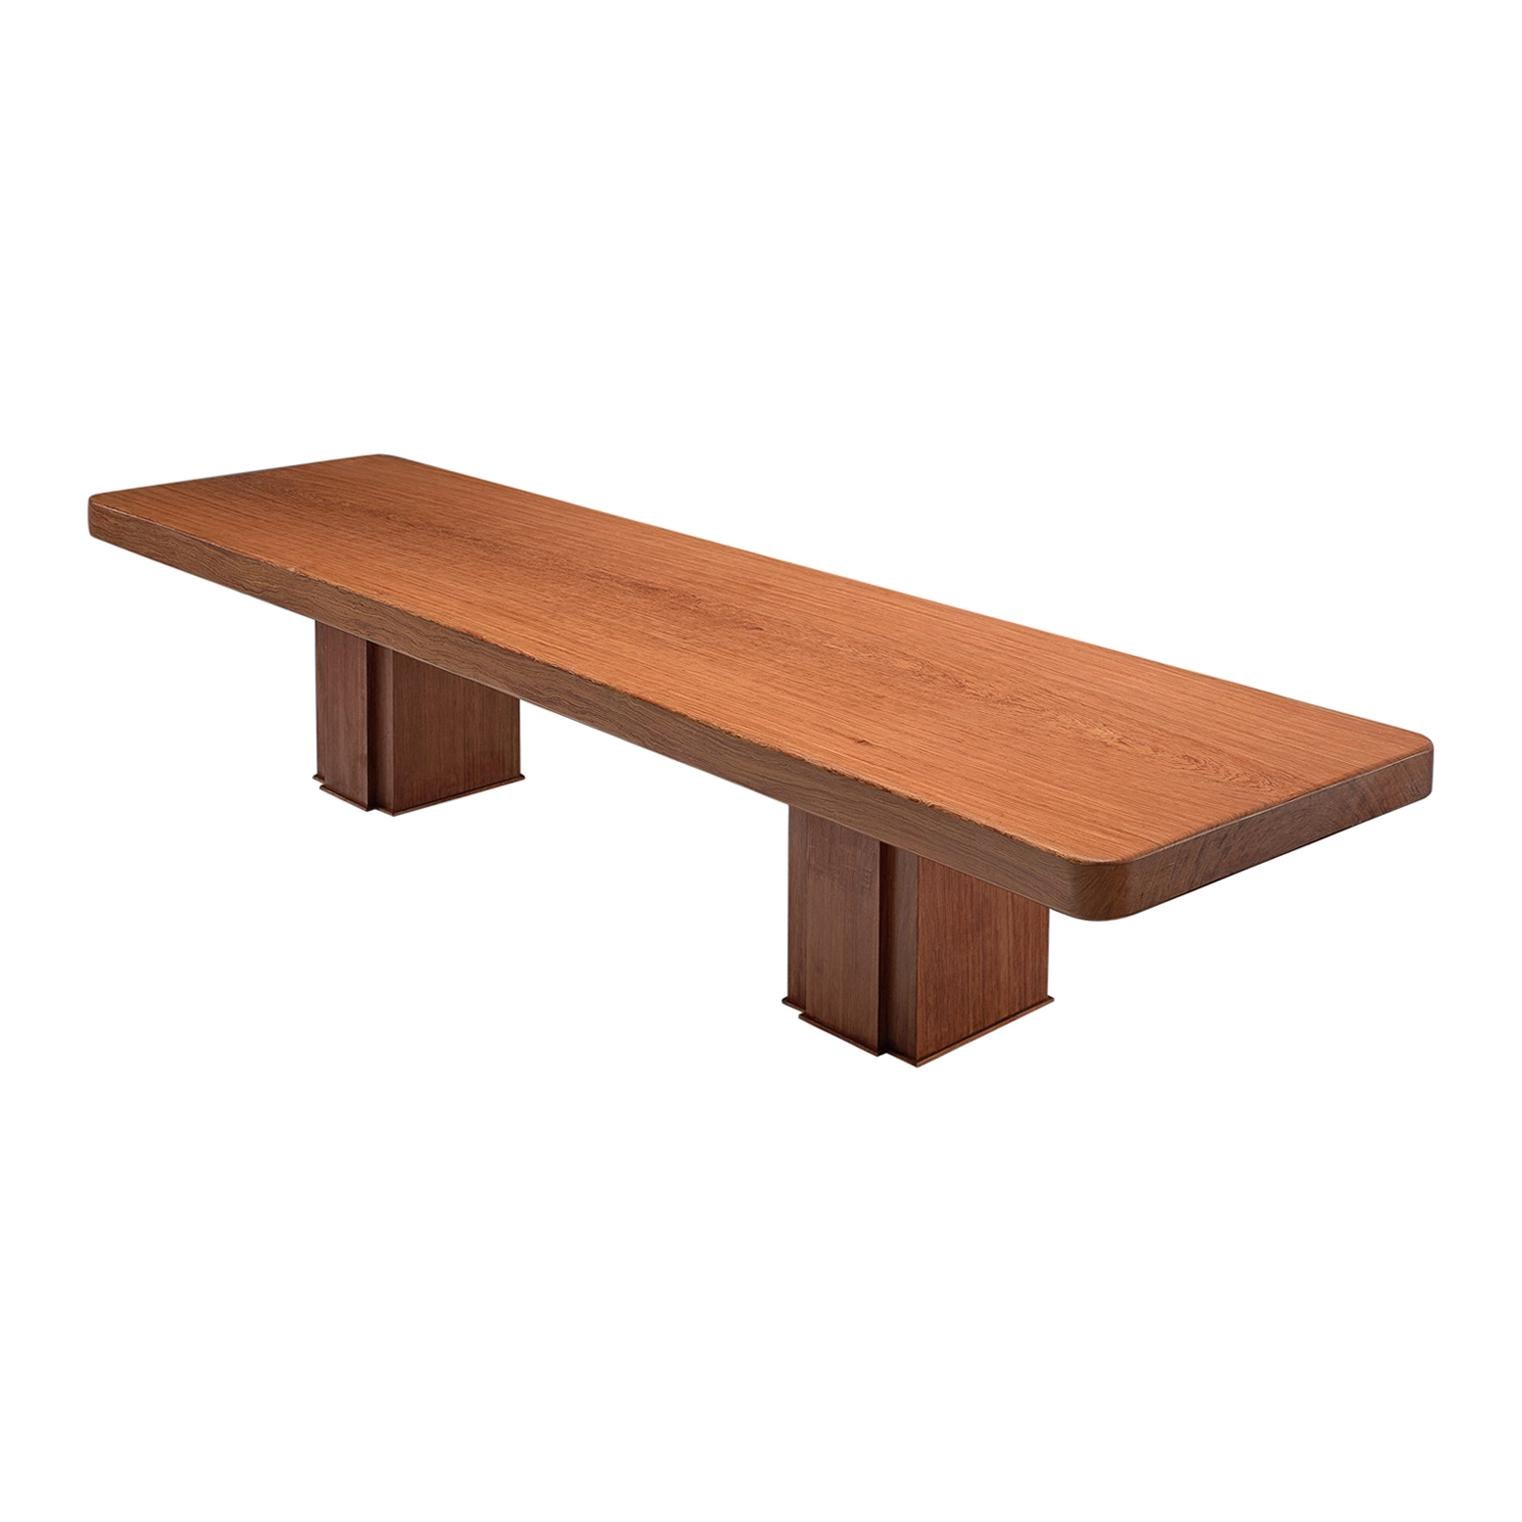 Spanish Conference Table in Solid Bubinga Wood